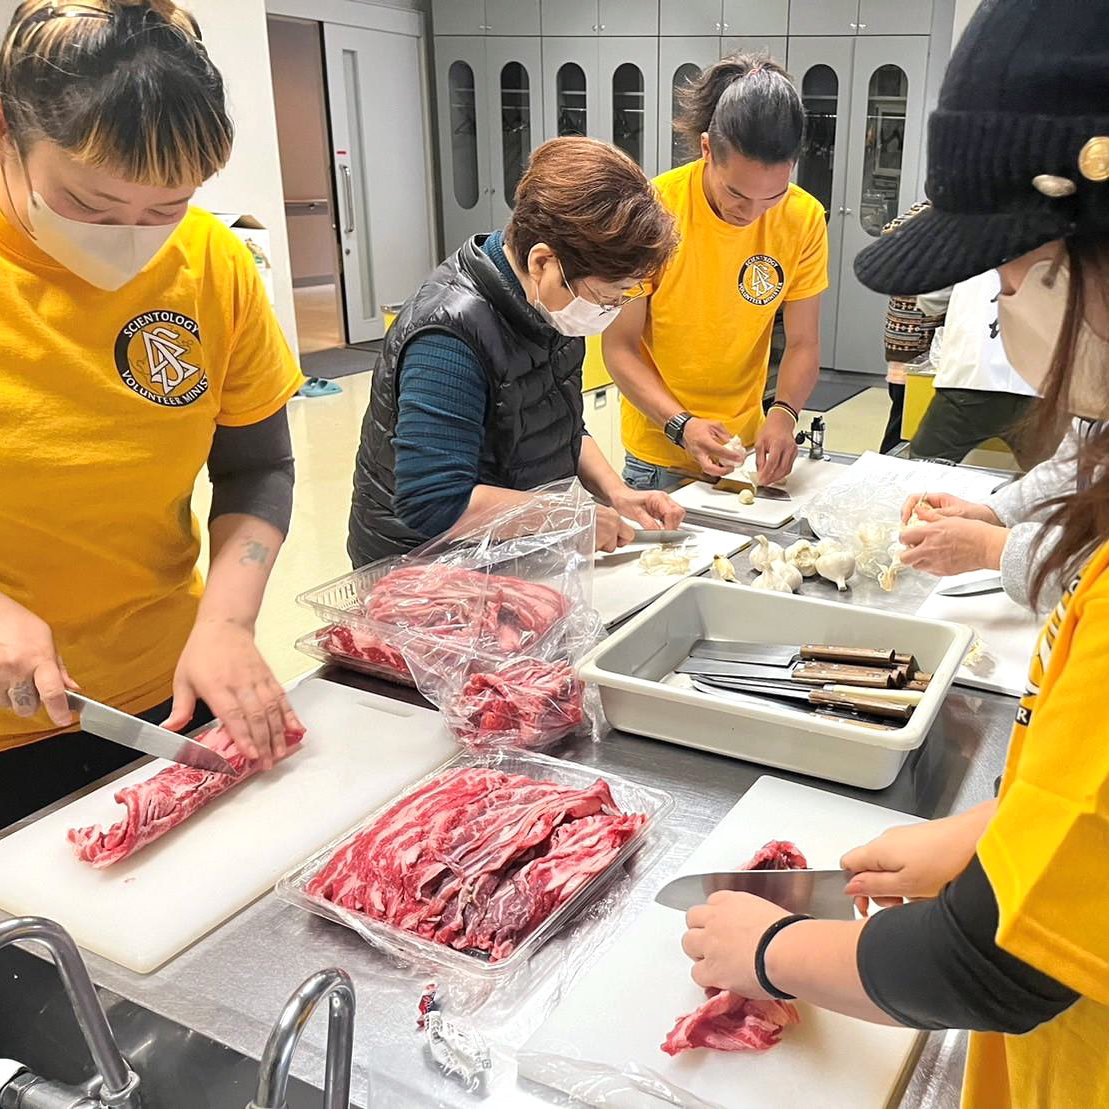 A team of more than 20 VMs from Tokyo helped thousands of people in evacuation centers in Himi and Nanao cities, two of the worst hit areas, by setting up temporary bedding, preparing hot meals and delivering assists to evacuees and staff.